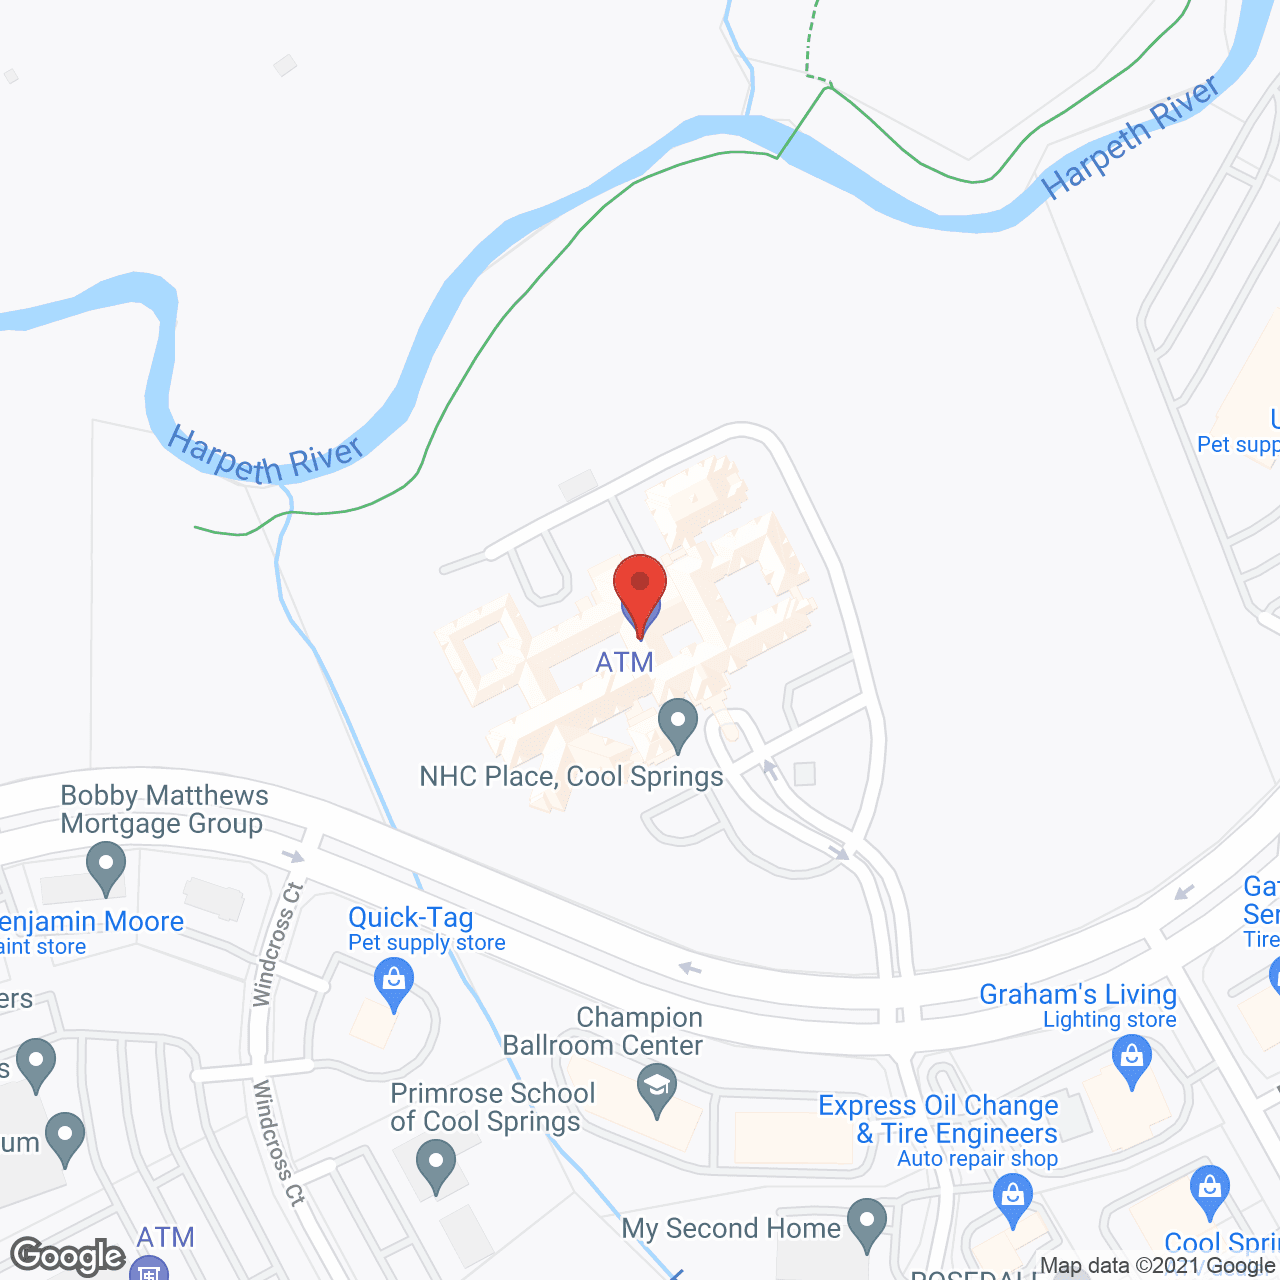 NHC Place at Cool Springs in google map